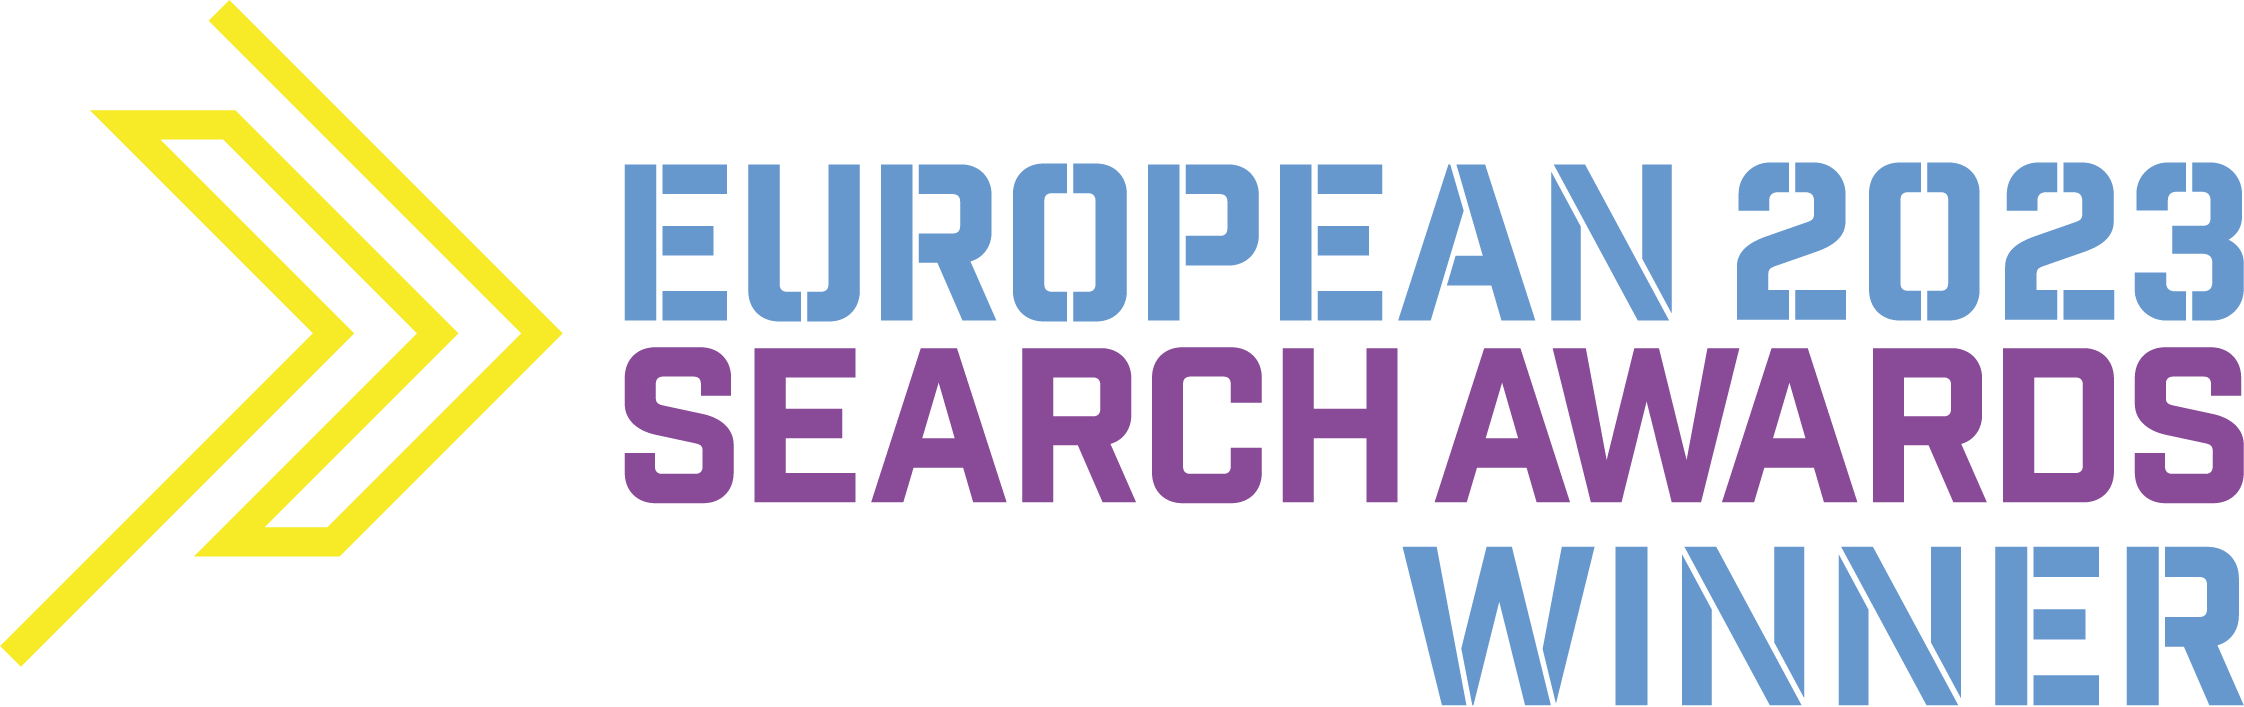 Winner for the European Search Awards 2023 - The Best Use of Data (SEO - large enterprise)